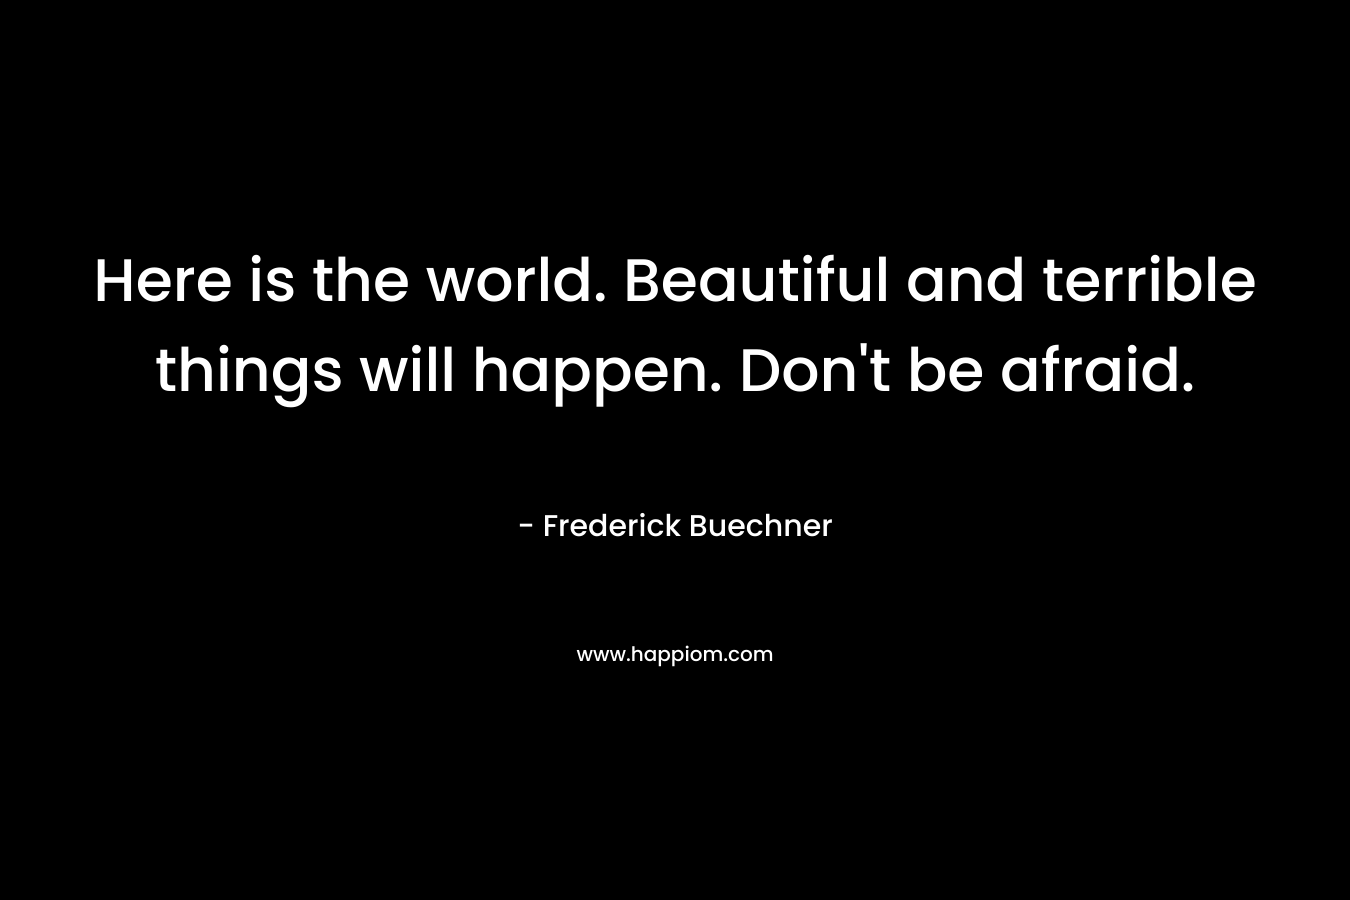 Here is the world. Beautiful and terrible things will happen. Don't be afraid.